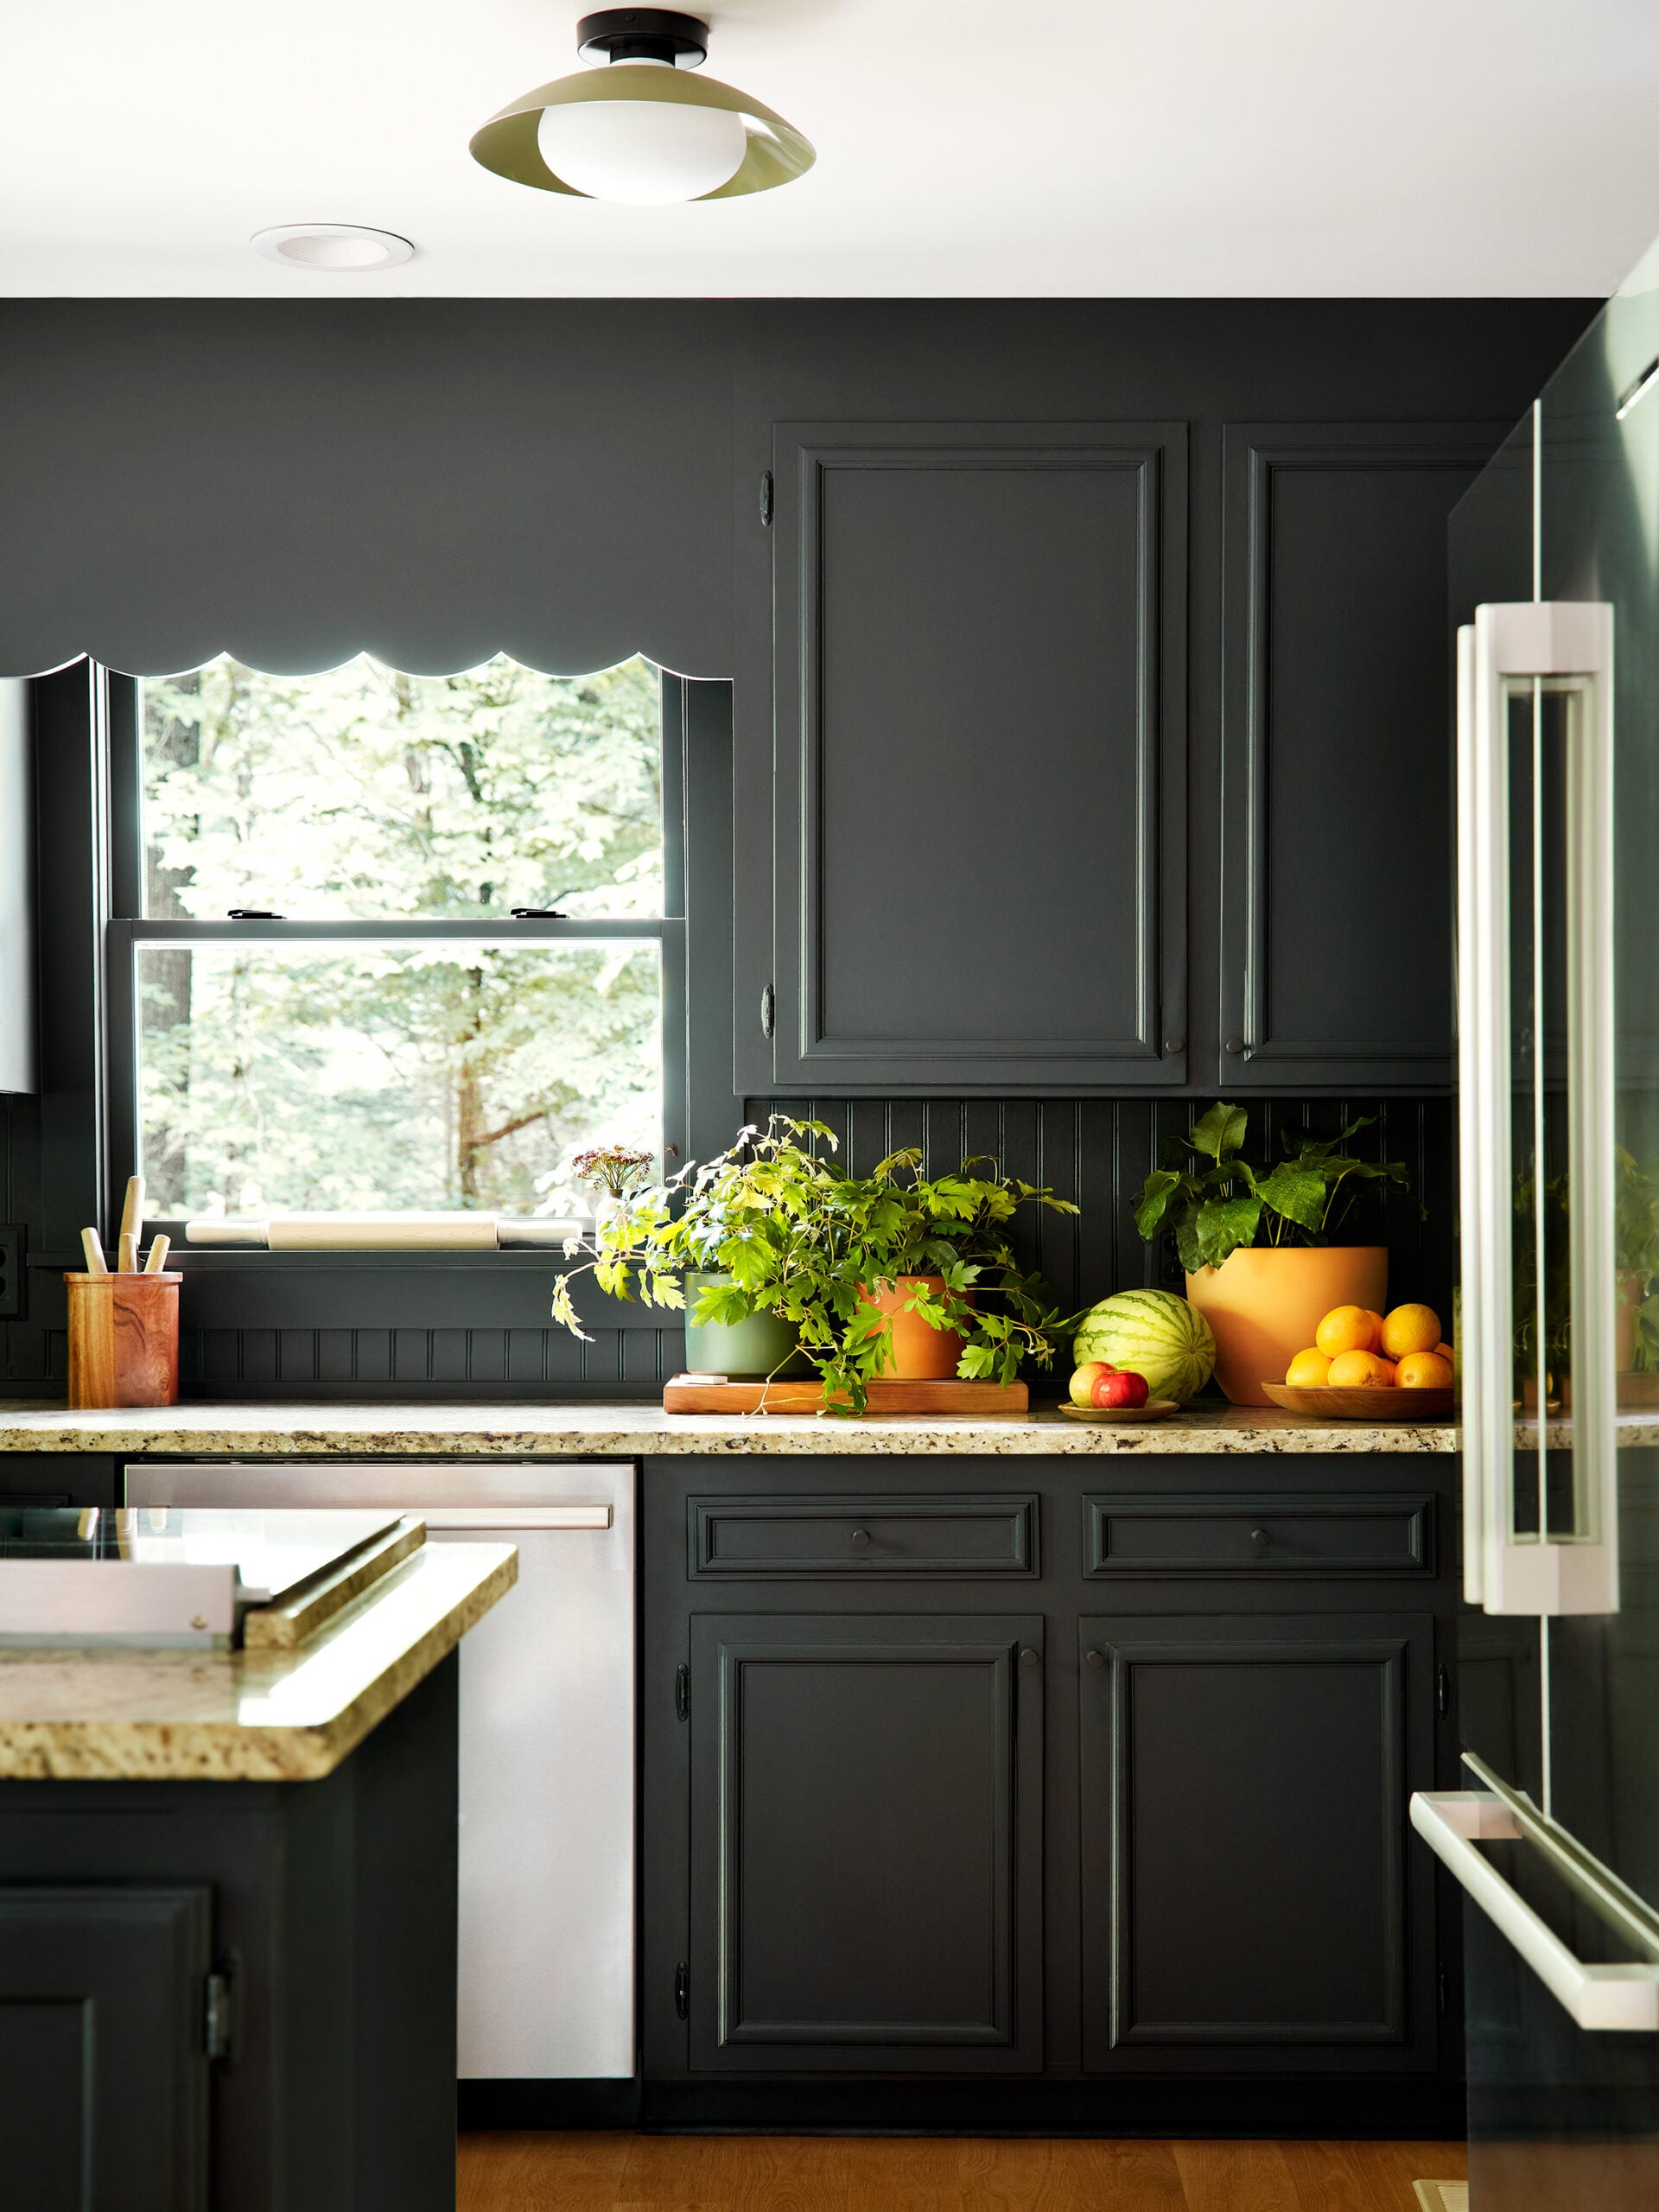 Black painted kitchen cabinets with scalloped detail by the window